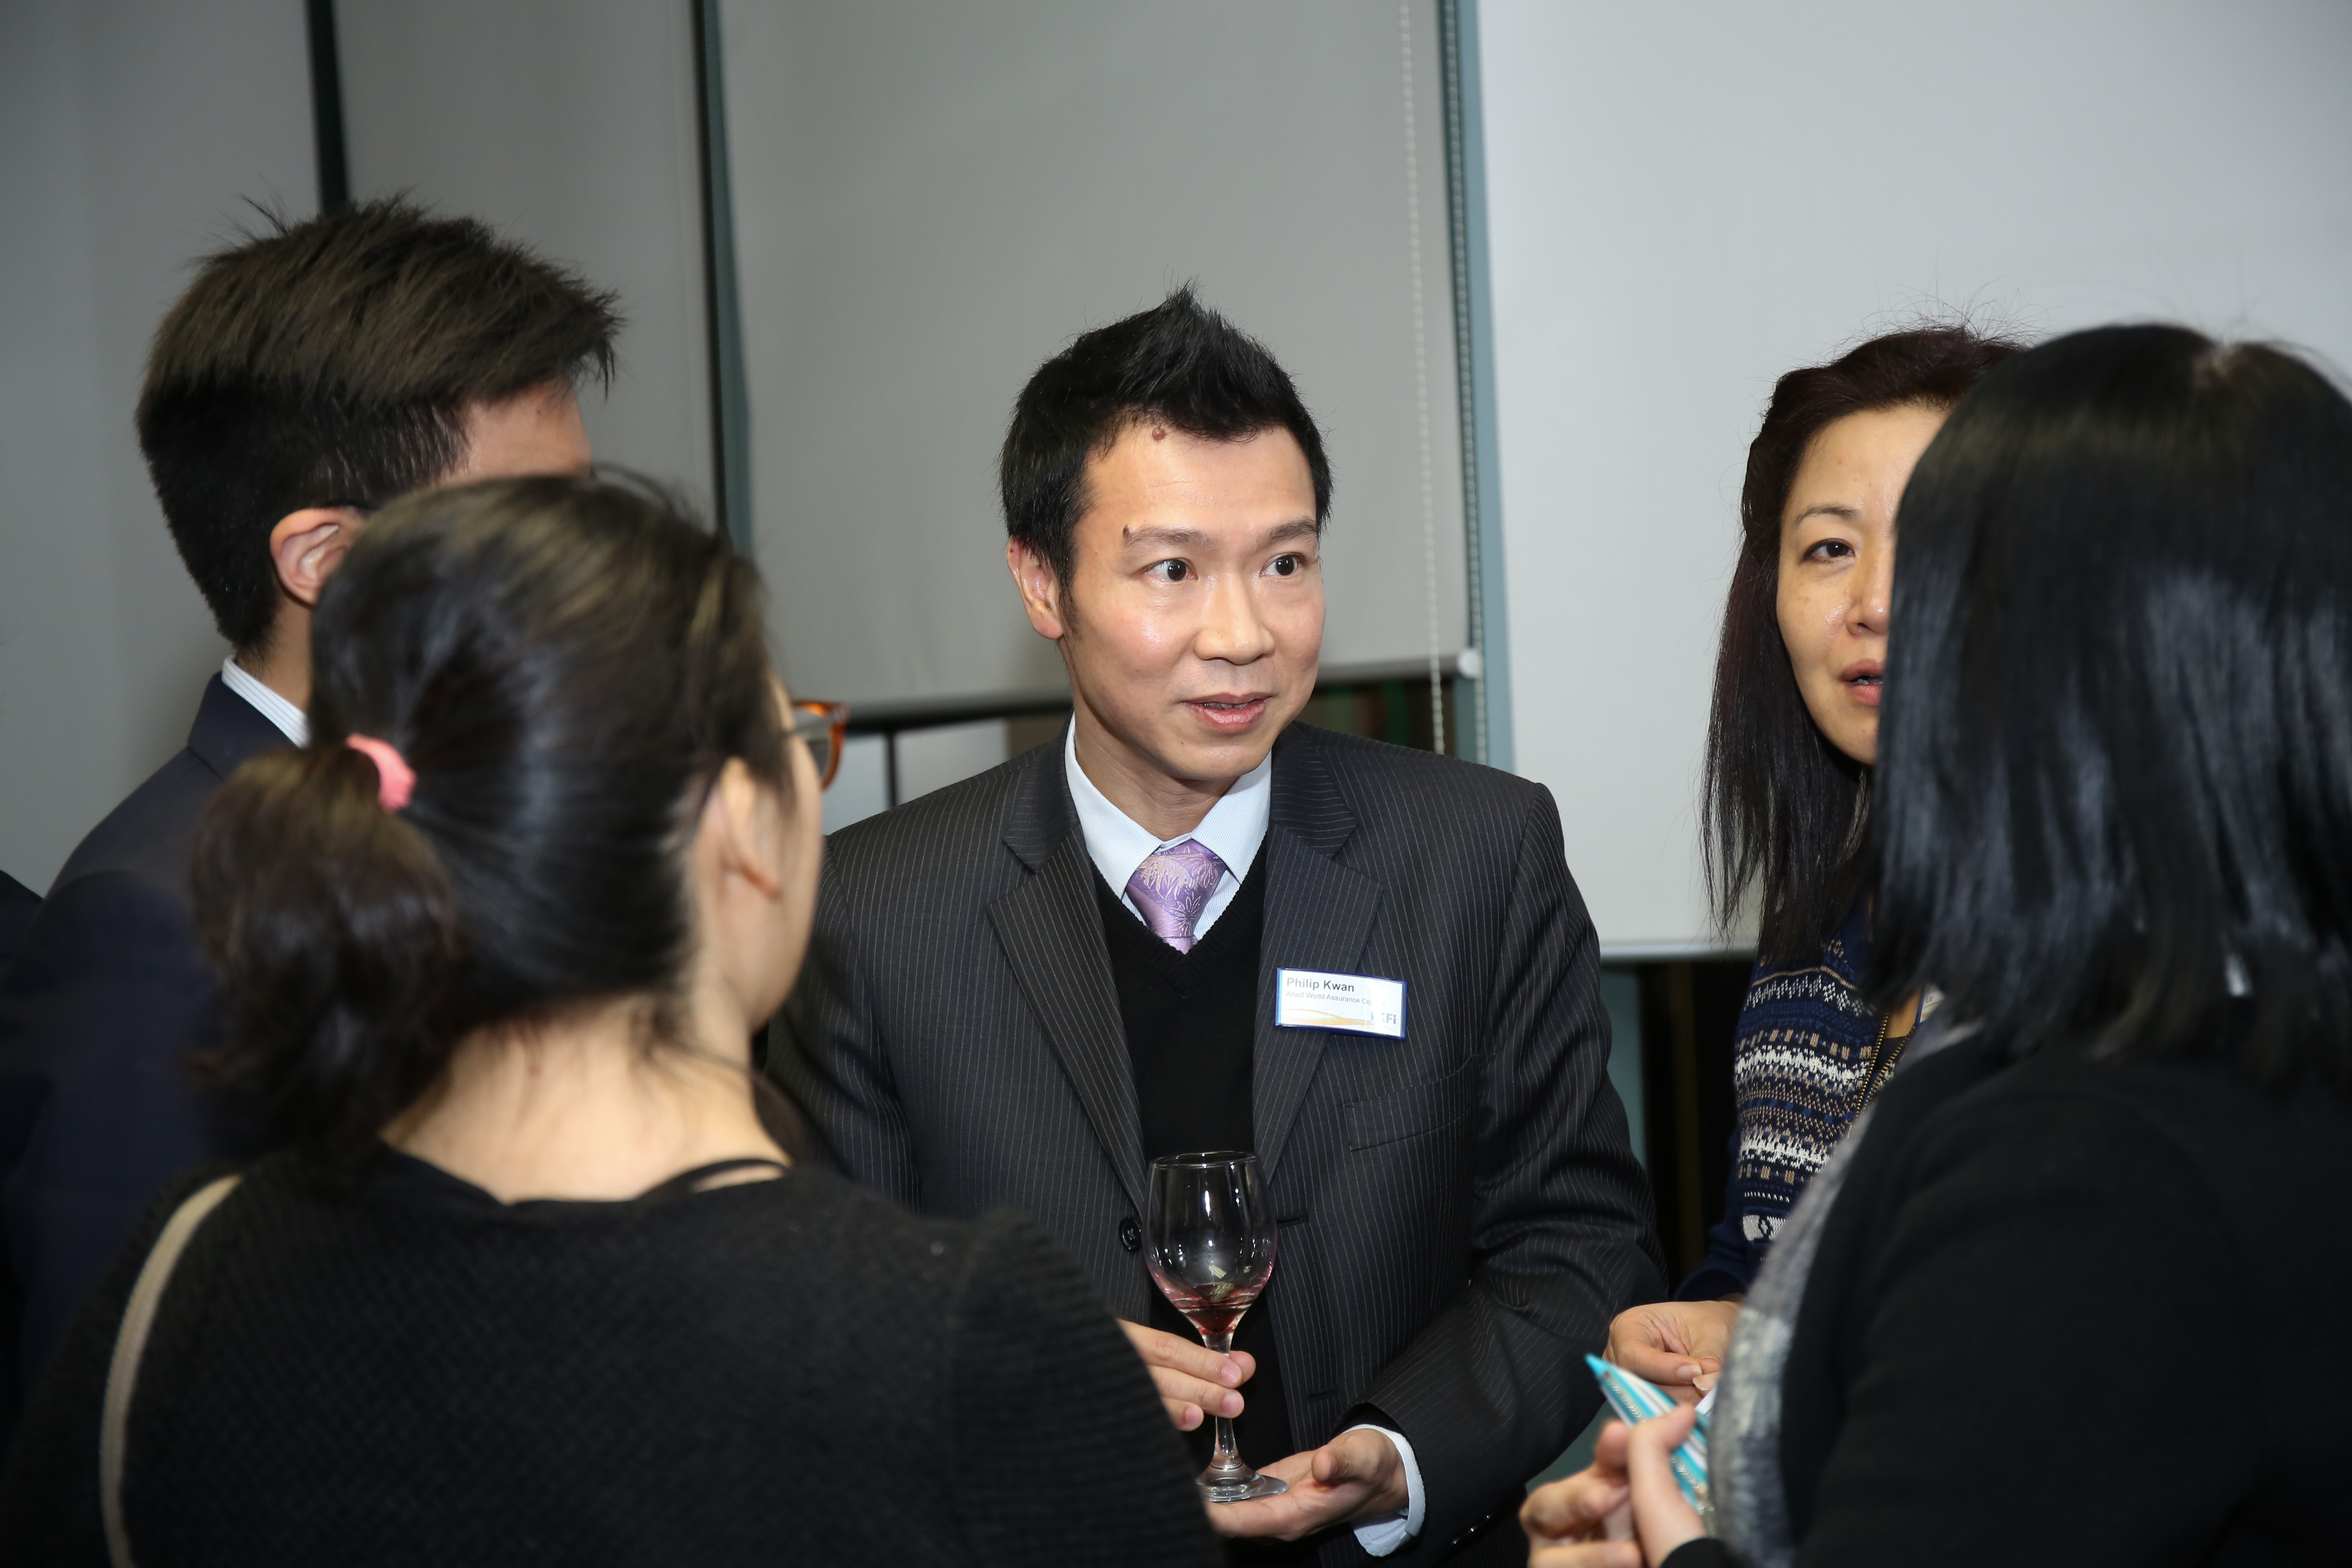 2015 Extraordinary General Meeting & Christmas Cocktail Party